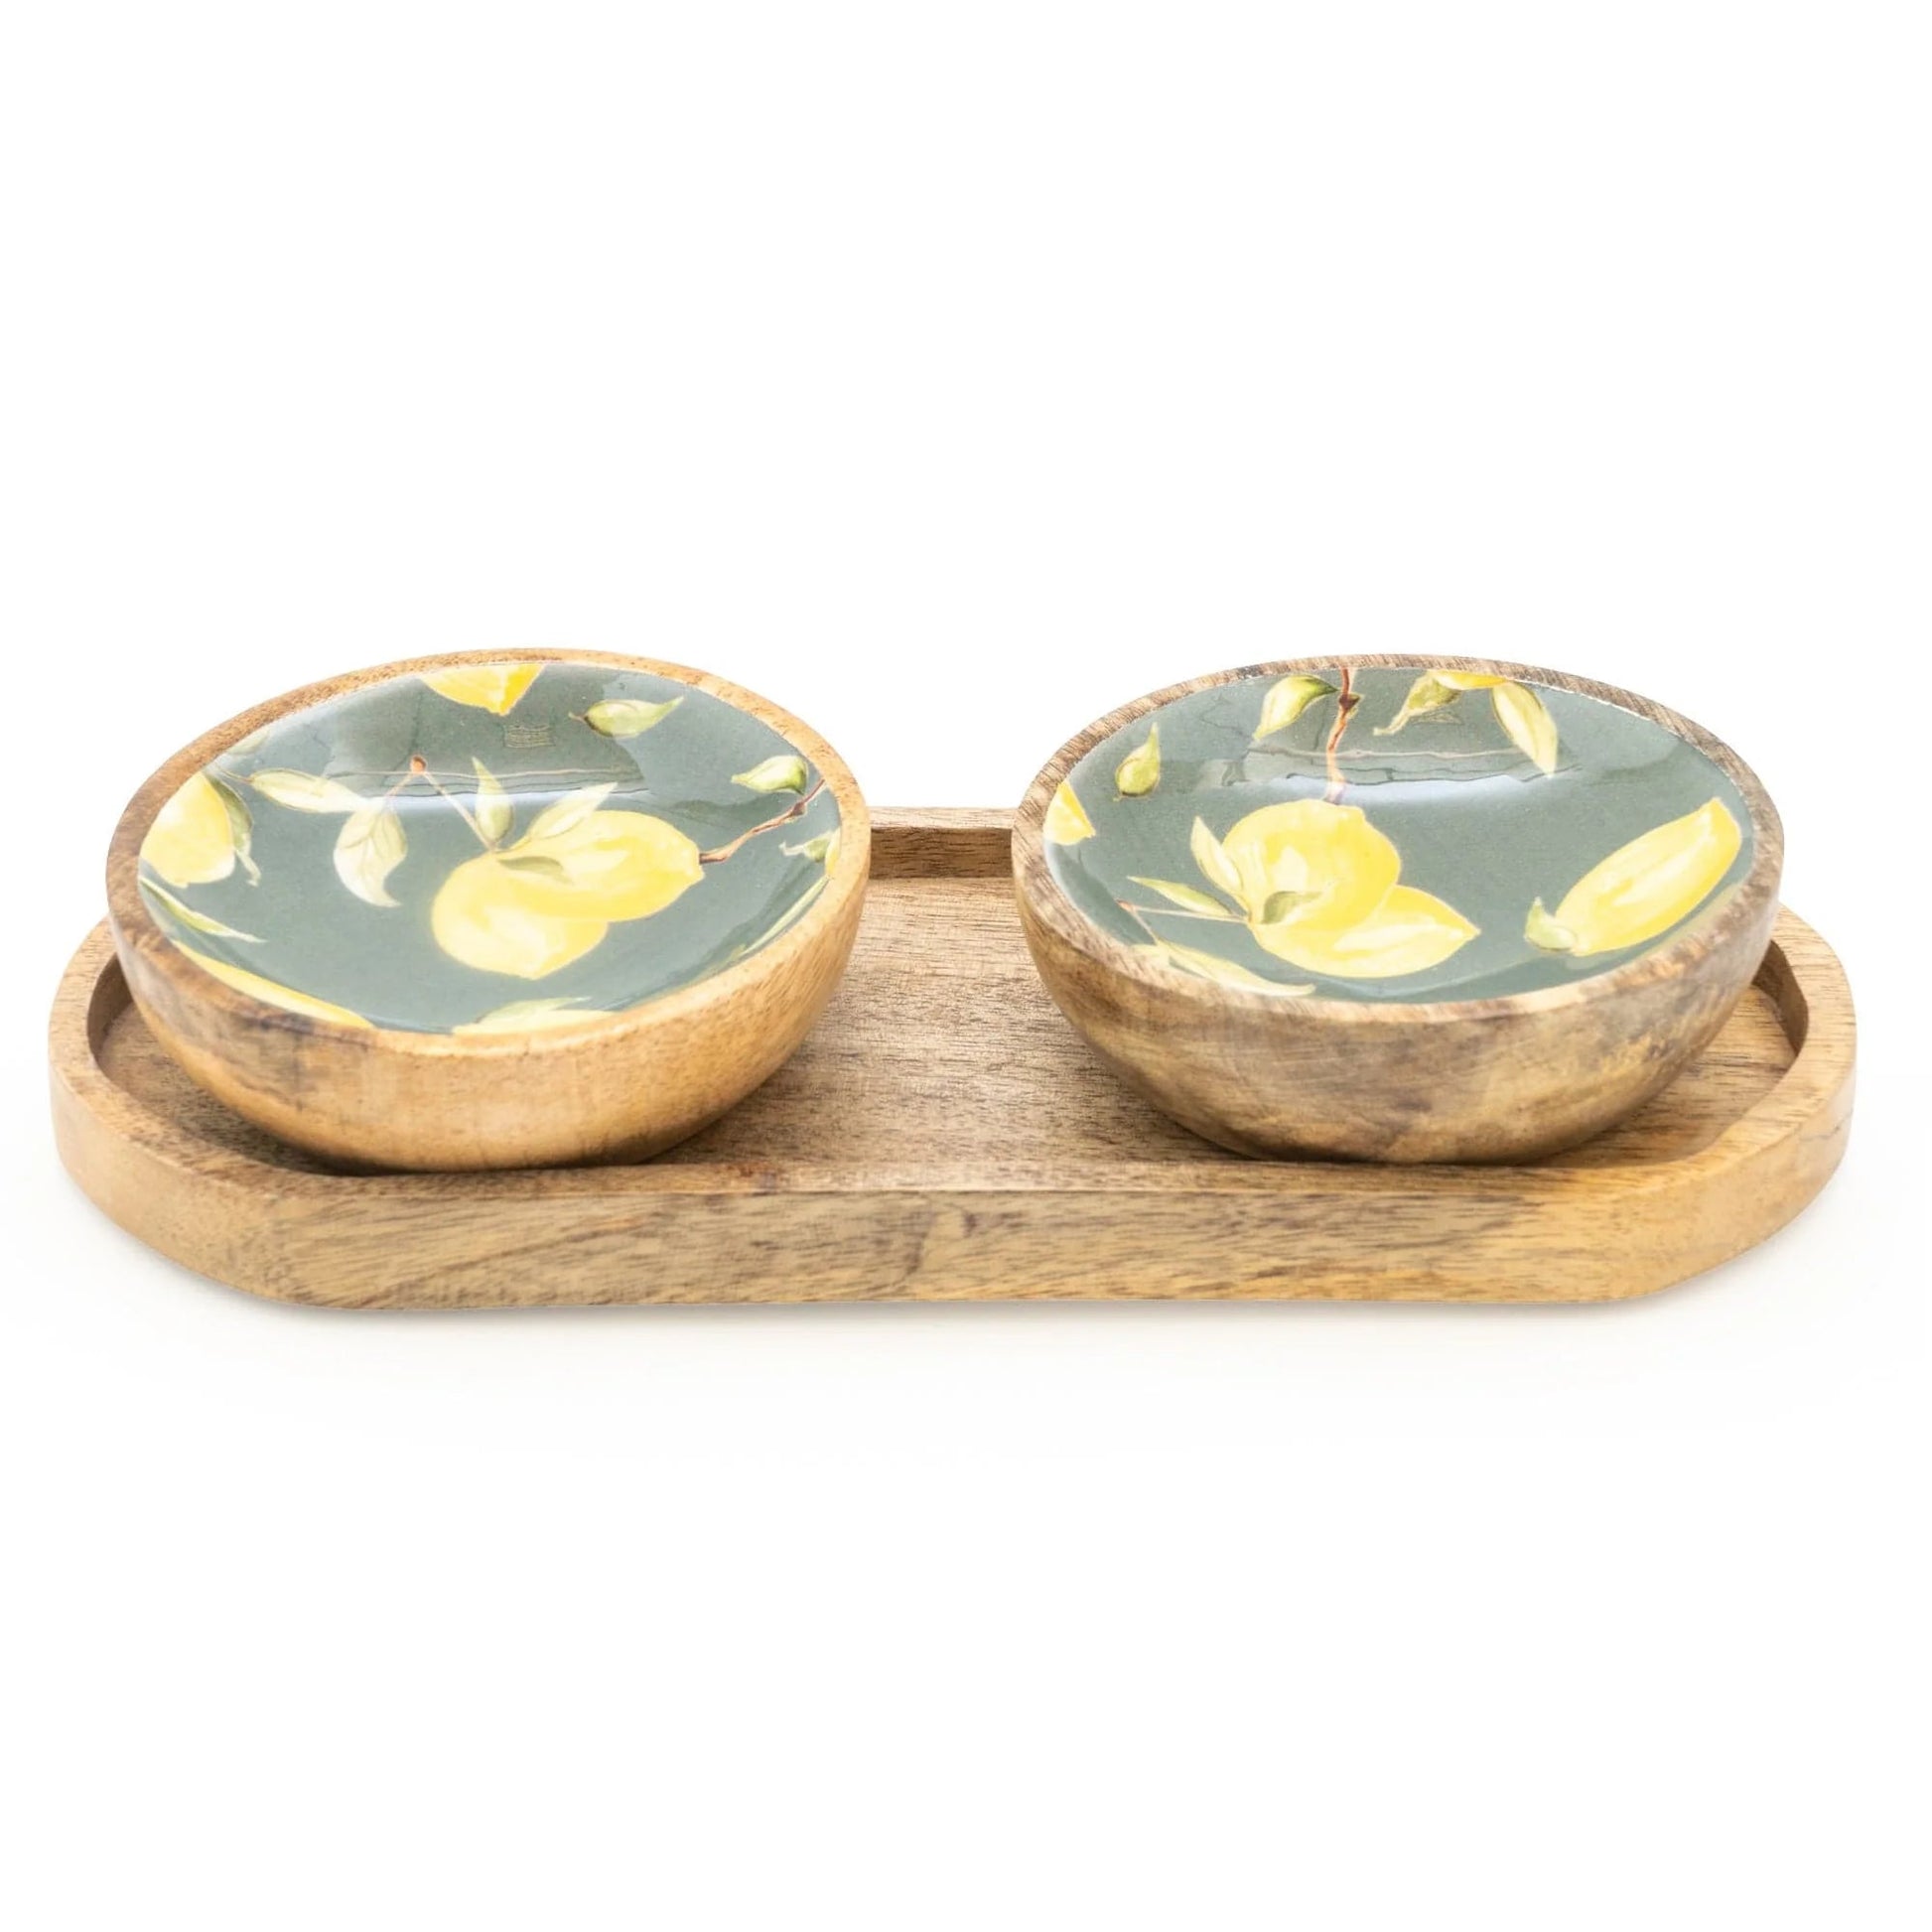 Handcrafted Set of 2 Small Mango Wood Dipping Bowls - Sicilian Orchard - Peppy & Sage